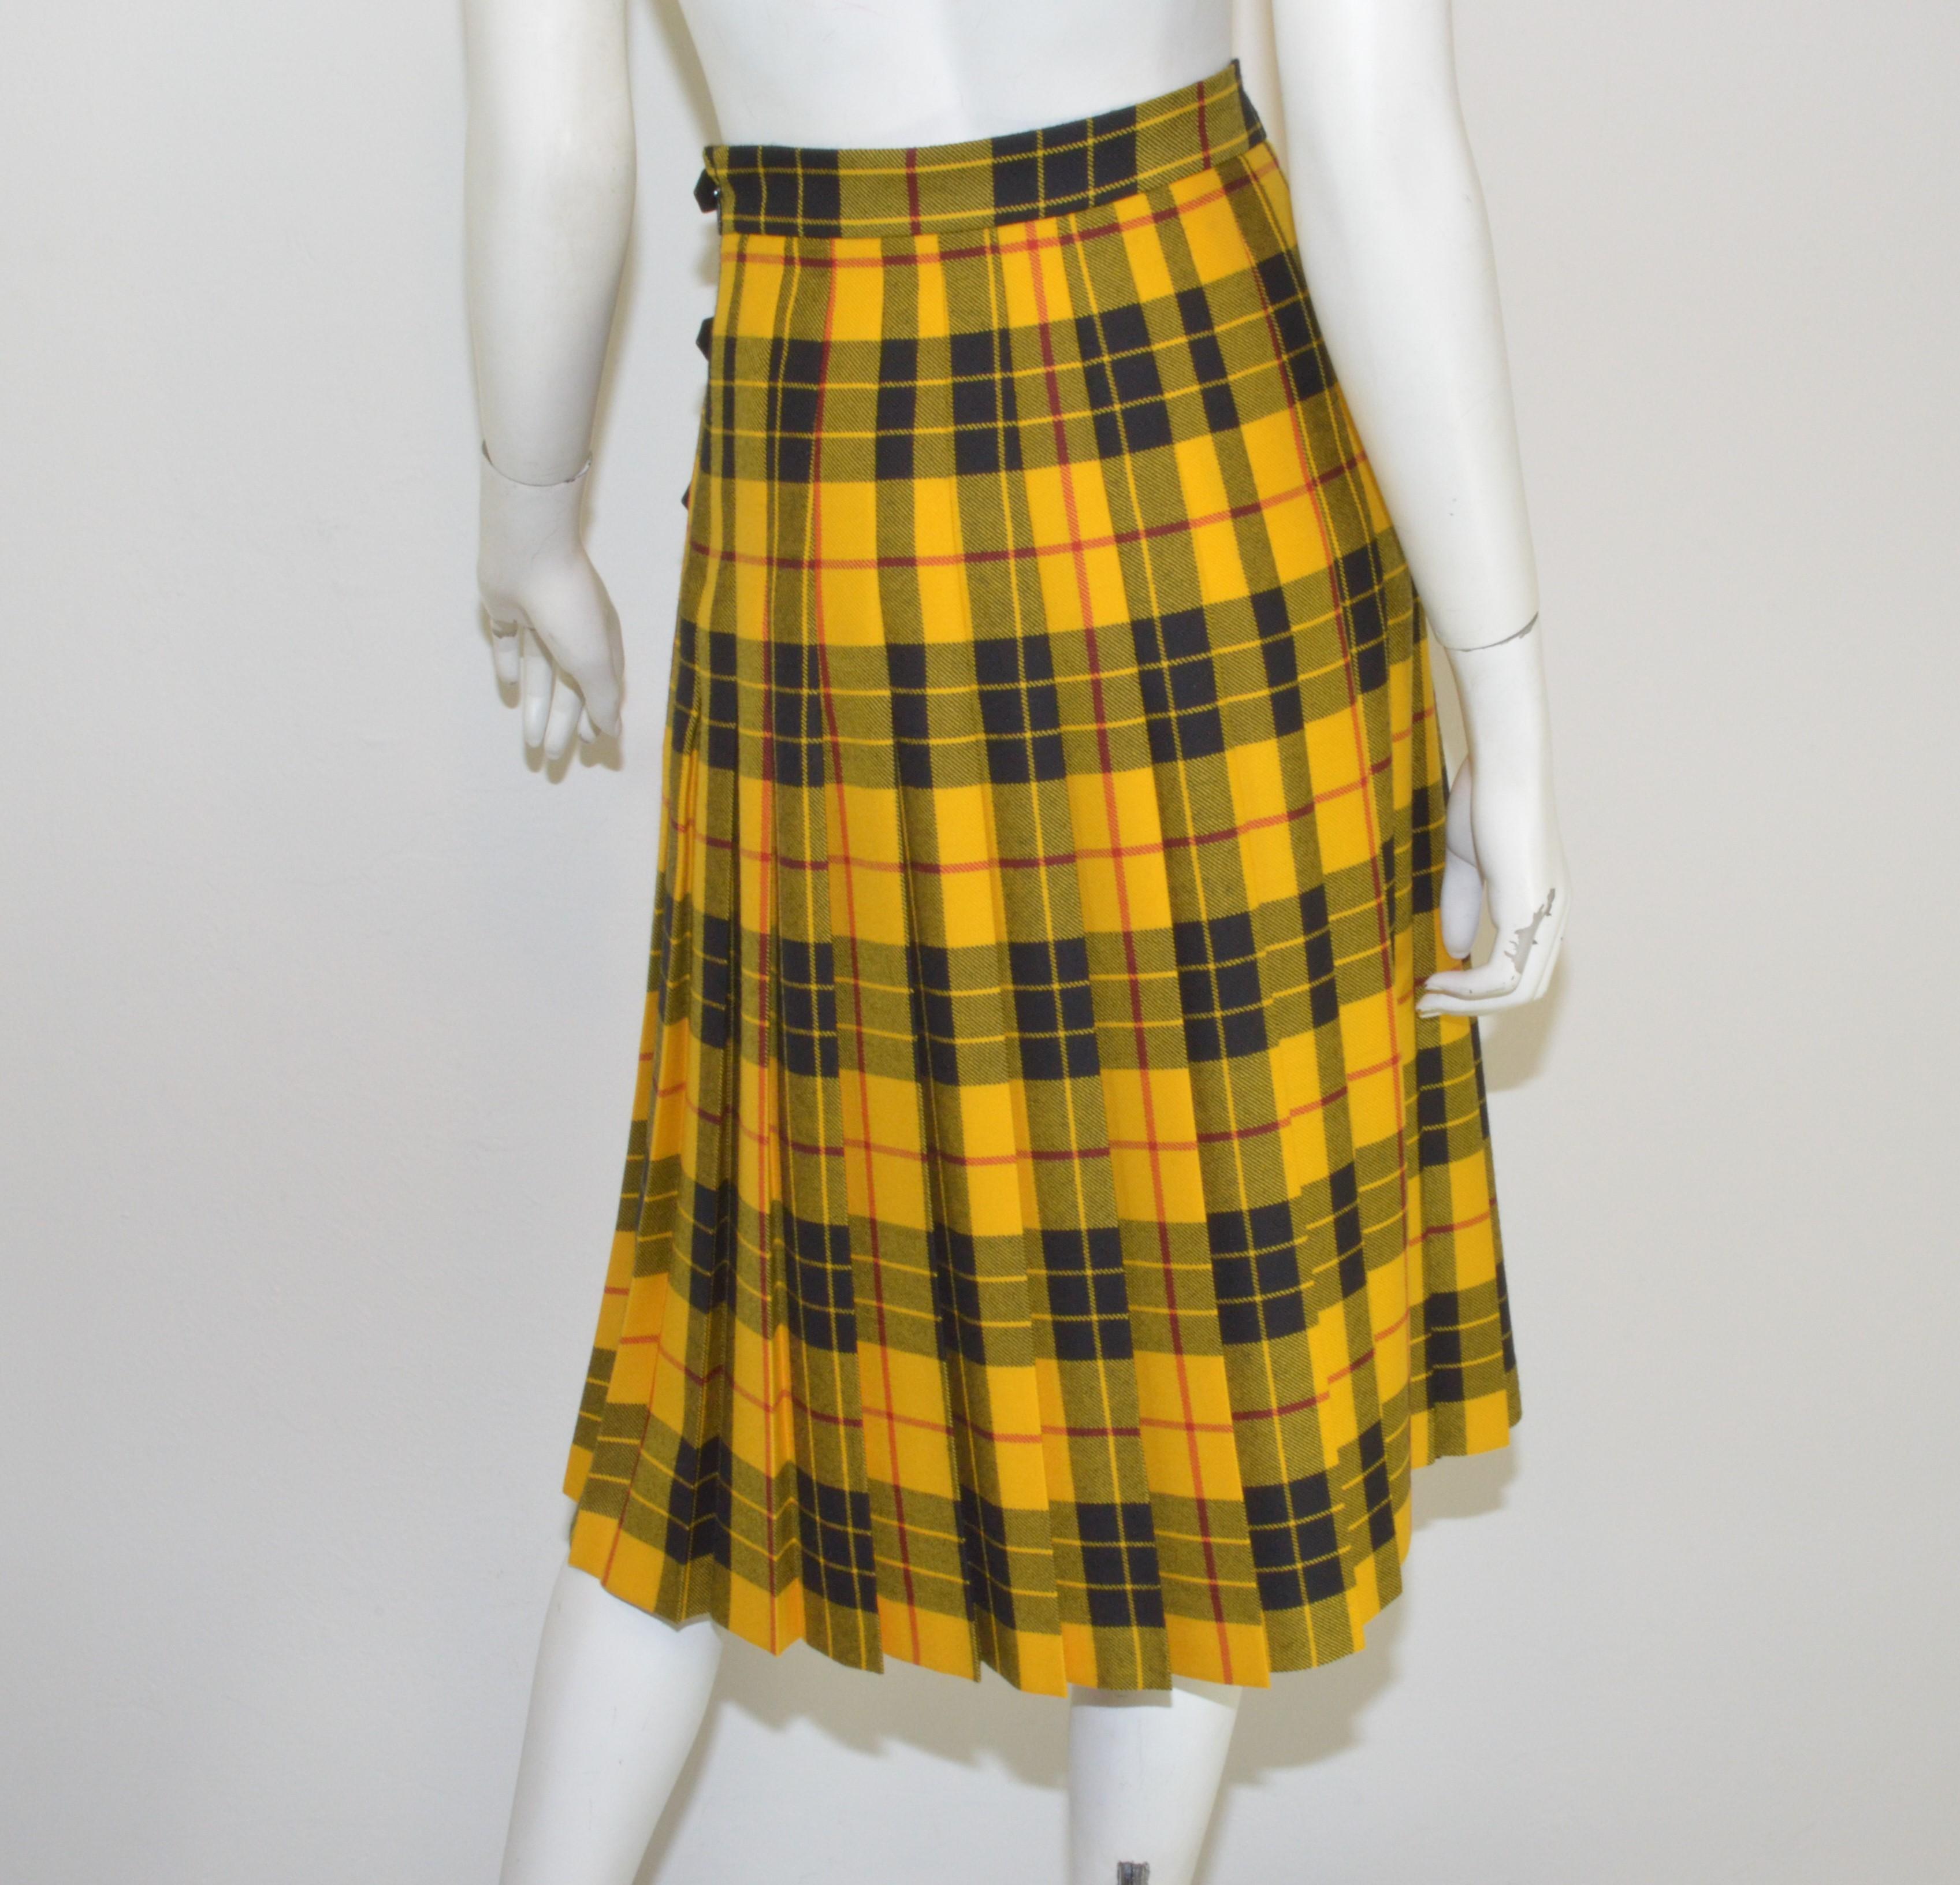 Gucci Plaid Kilt Skirt with Embroidered Dog Motif - Skirt is featured in a yellow, black and red color combination with a pleated design, adjustable leather buckles along the left hip, back side zipper fastening, 100% wool. Skirt is labeled a size